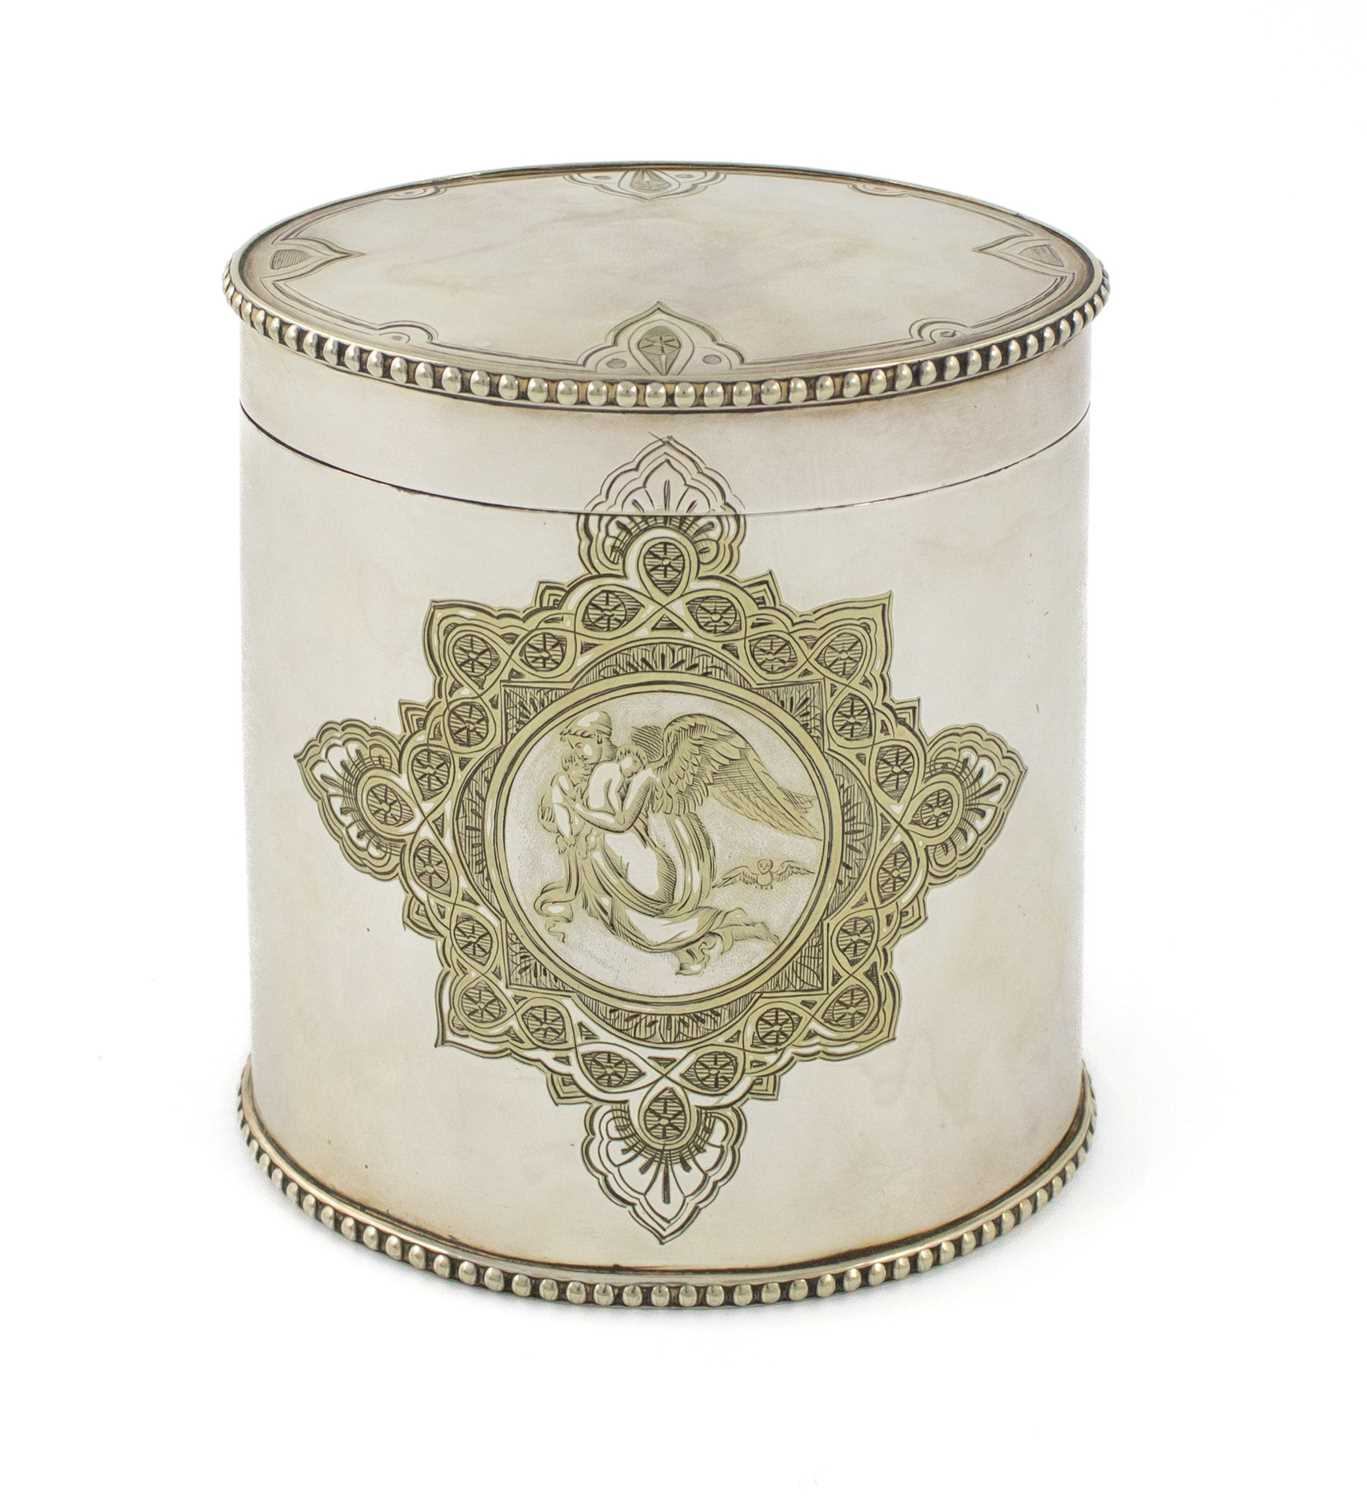 An electroplated tea caddy, by Roberts & Briggs, circa 1860, oval form, beaded borders, hinged